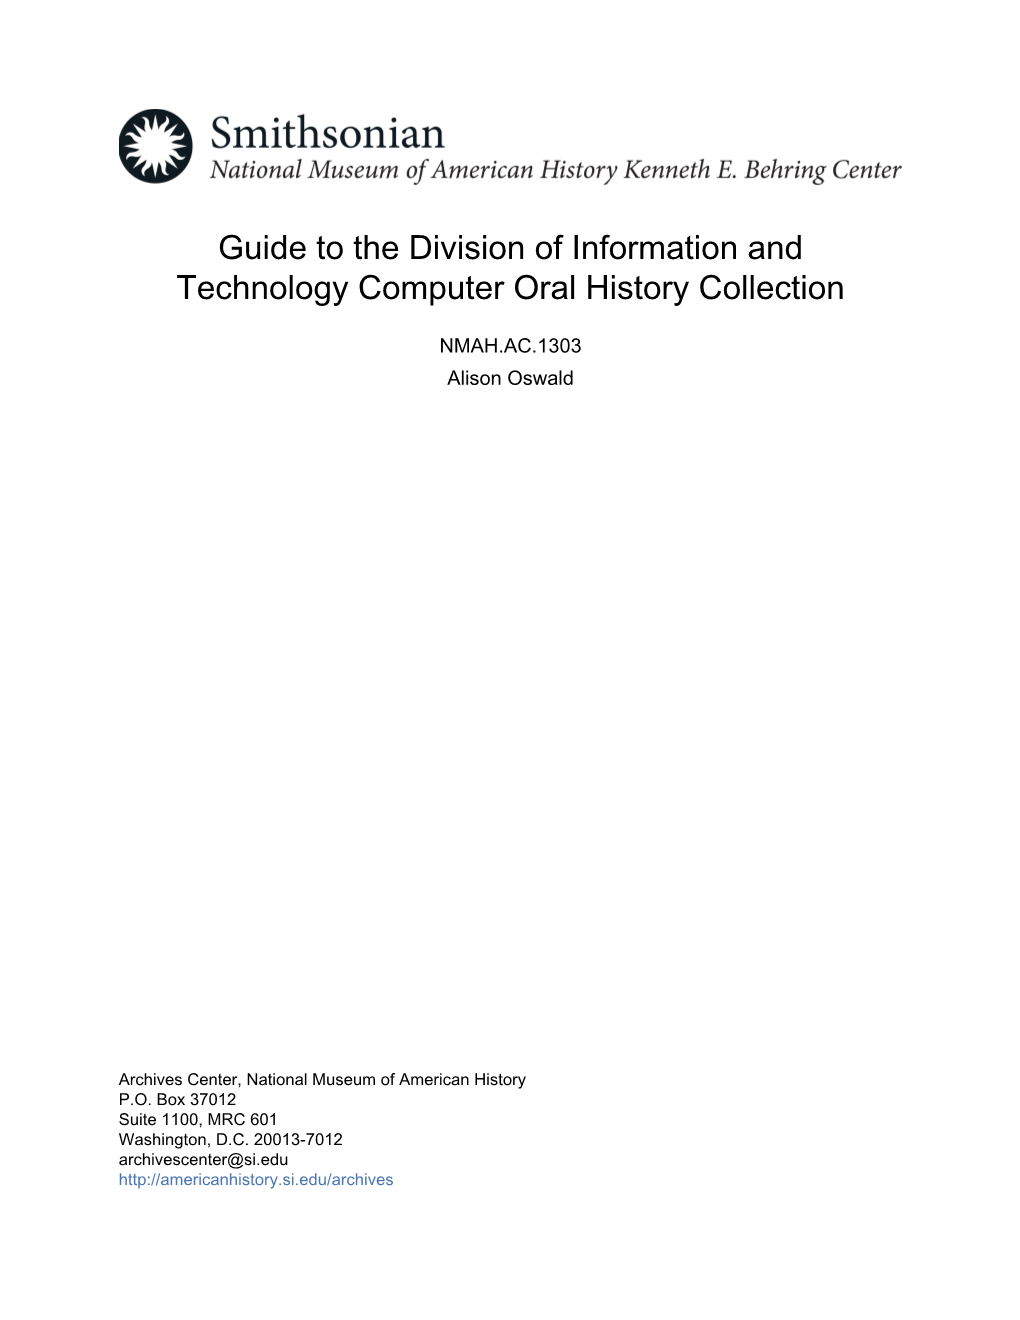 Guide to the Division of Information and Technology Computer Oral History Collection